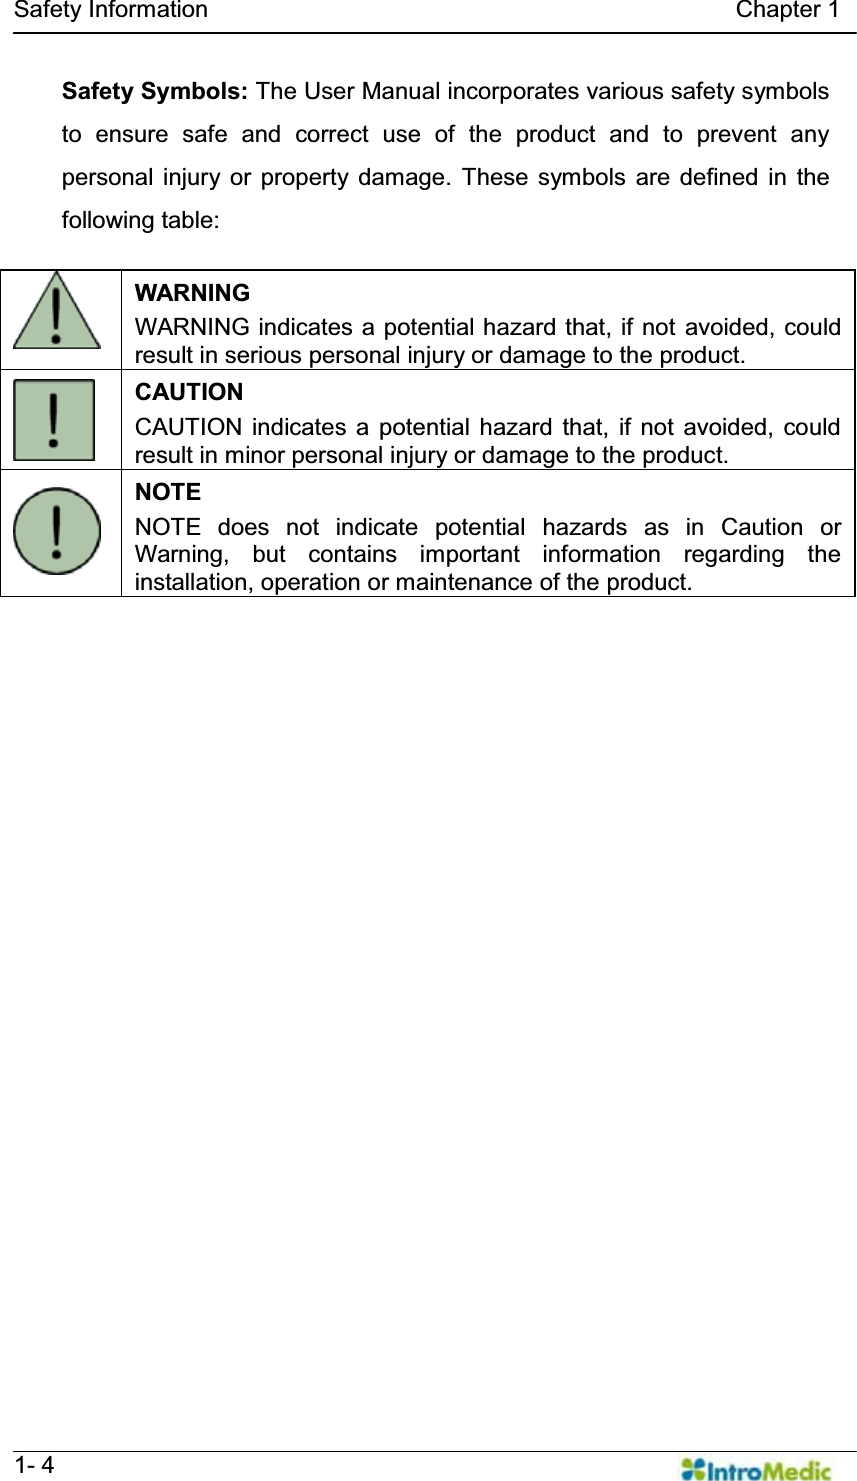   Safety Information                                            Chapter 1   1- 4 Safety Symbols: The User Manual incorporates various safety symbols to ensure safe and correct use of the product and to prevent any personal injury or property damage. These symbols are defined in the following table:     WARNING WARNING indicates a potential hazard that, if not avoided, could result in serious personal injury or damage to the product.  CAUTION CAUTION indicates a potential hazard that, if not avoided, could result in minor personal injury or damage to the product.  NOTE NOTE does not indicate potential hazards as in Caution or Warning, but contains important information regarding the installation, operation or maintenance of the product.  